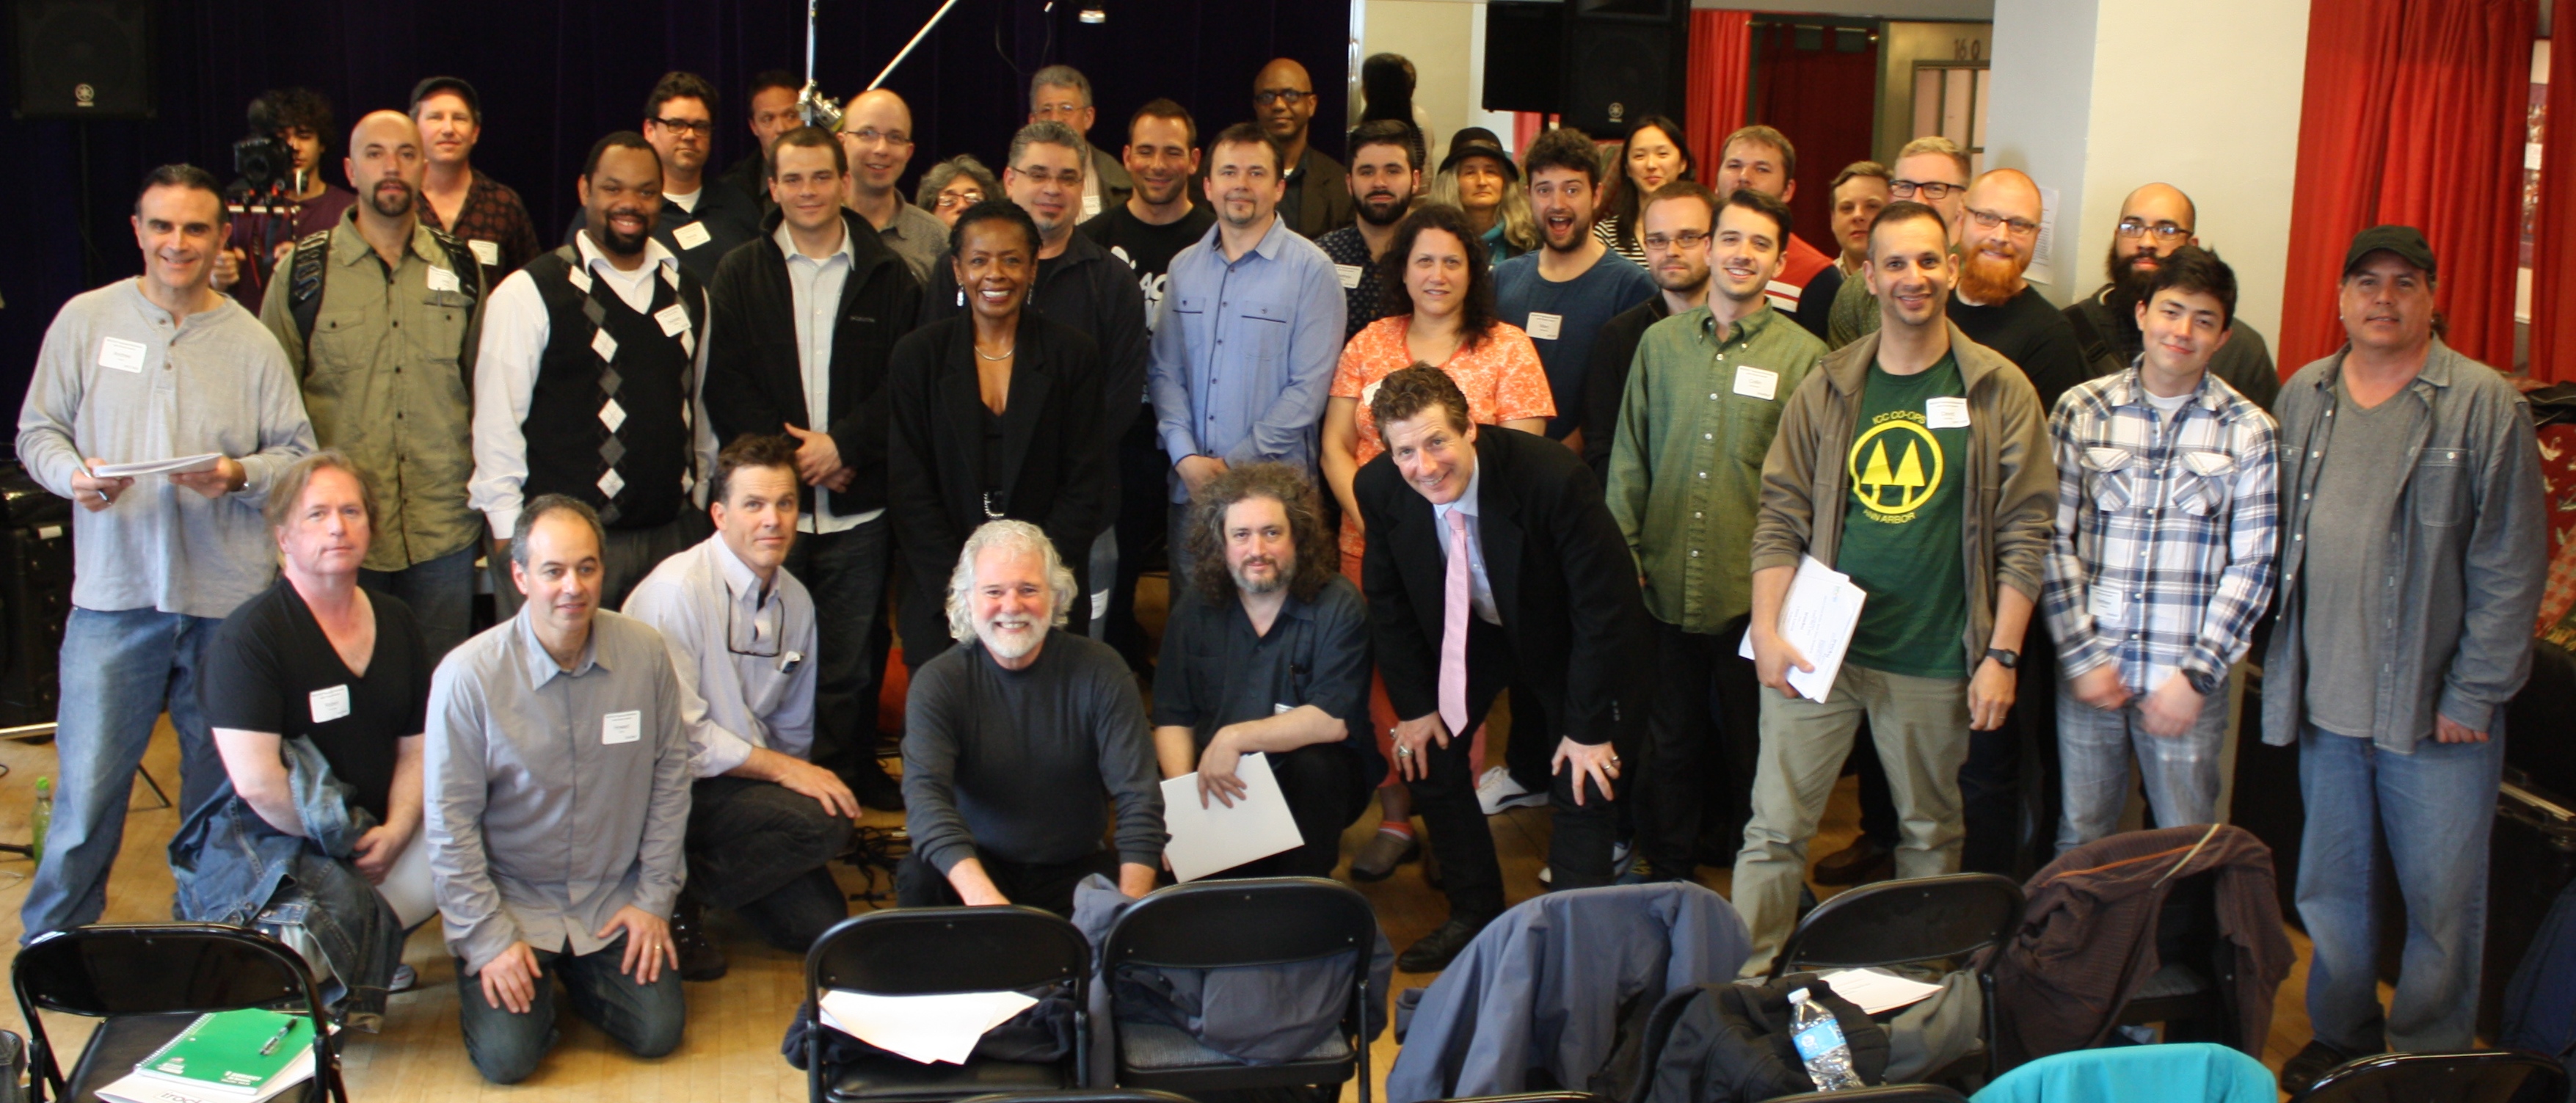 NYC Rock Piano Workshop with Chuck Leavell